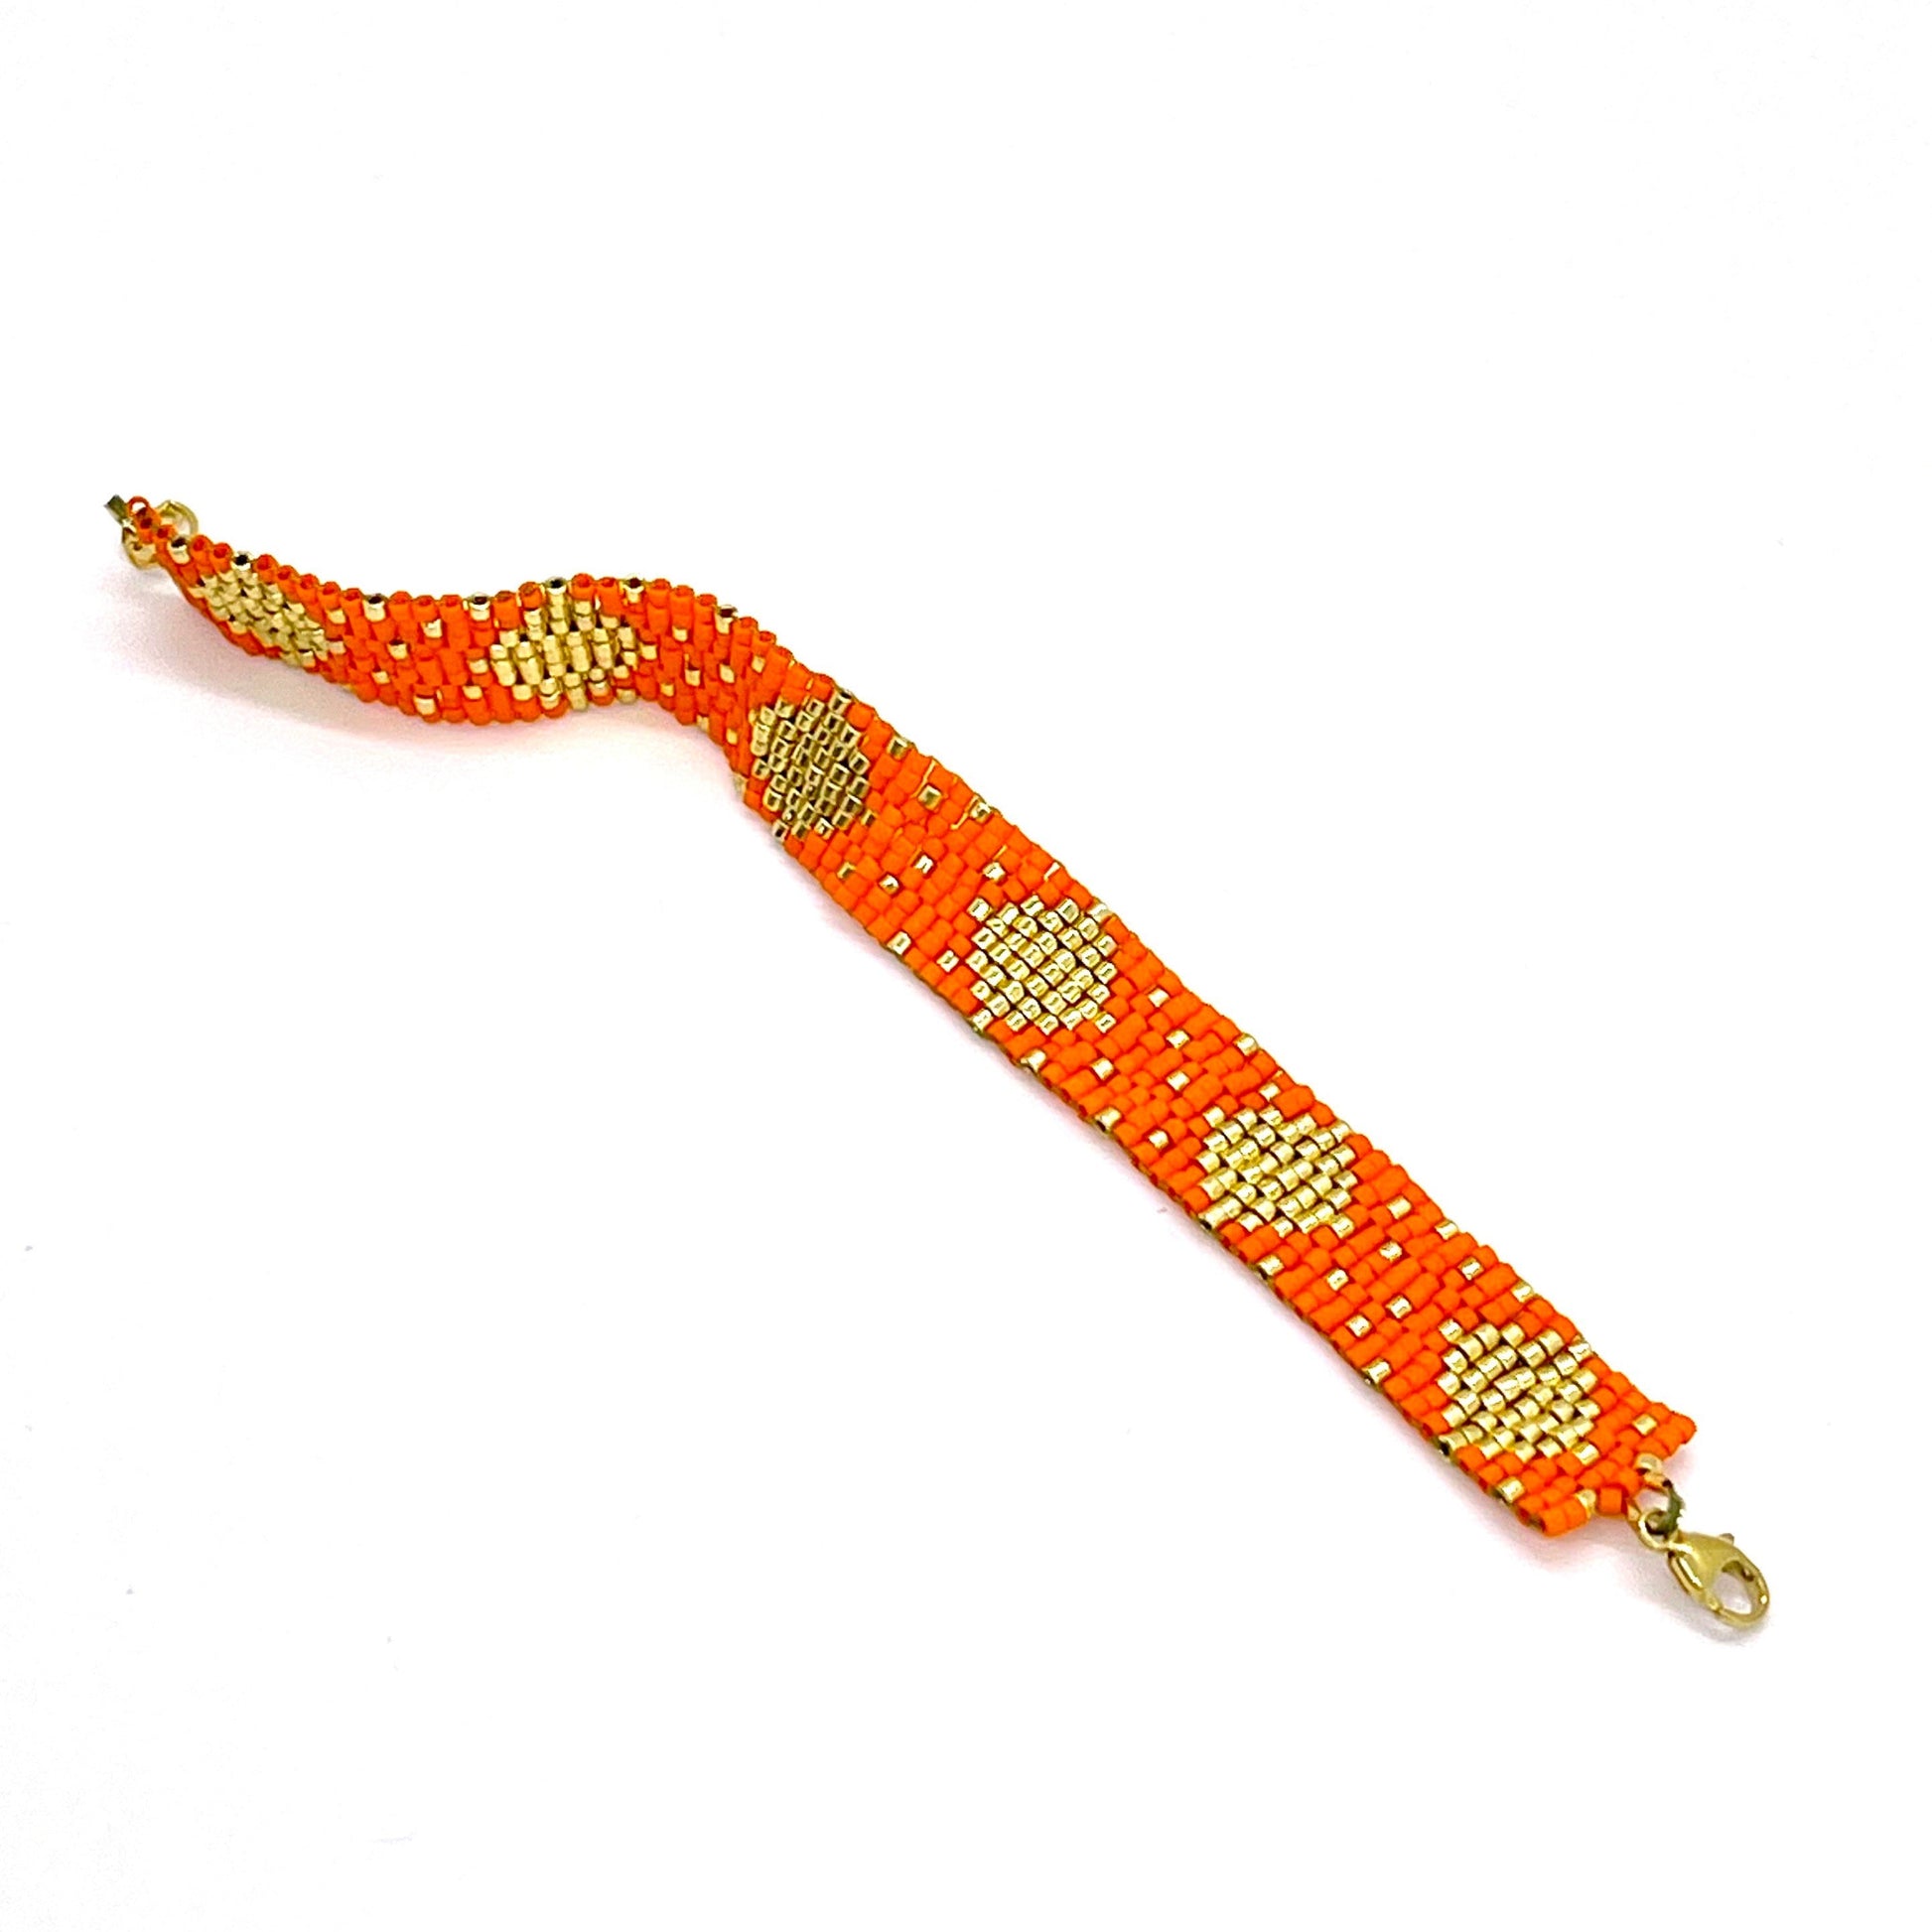 Two-tone bracelet with orange and gold-tone glass seed beads in a handwoven triangle pattern.